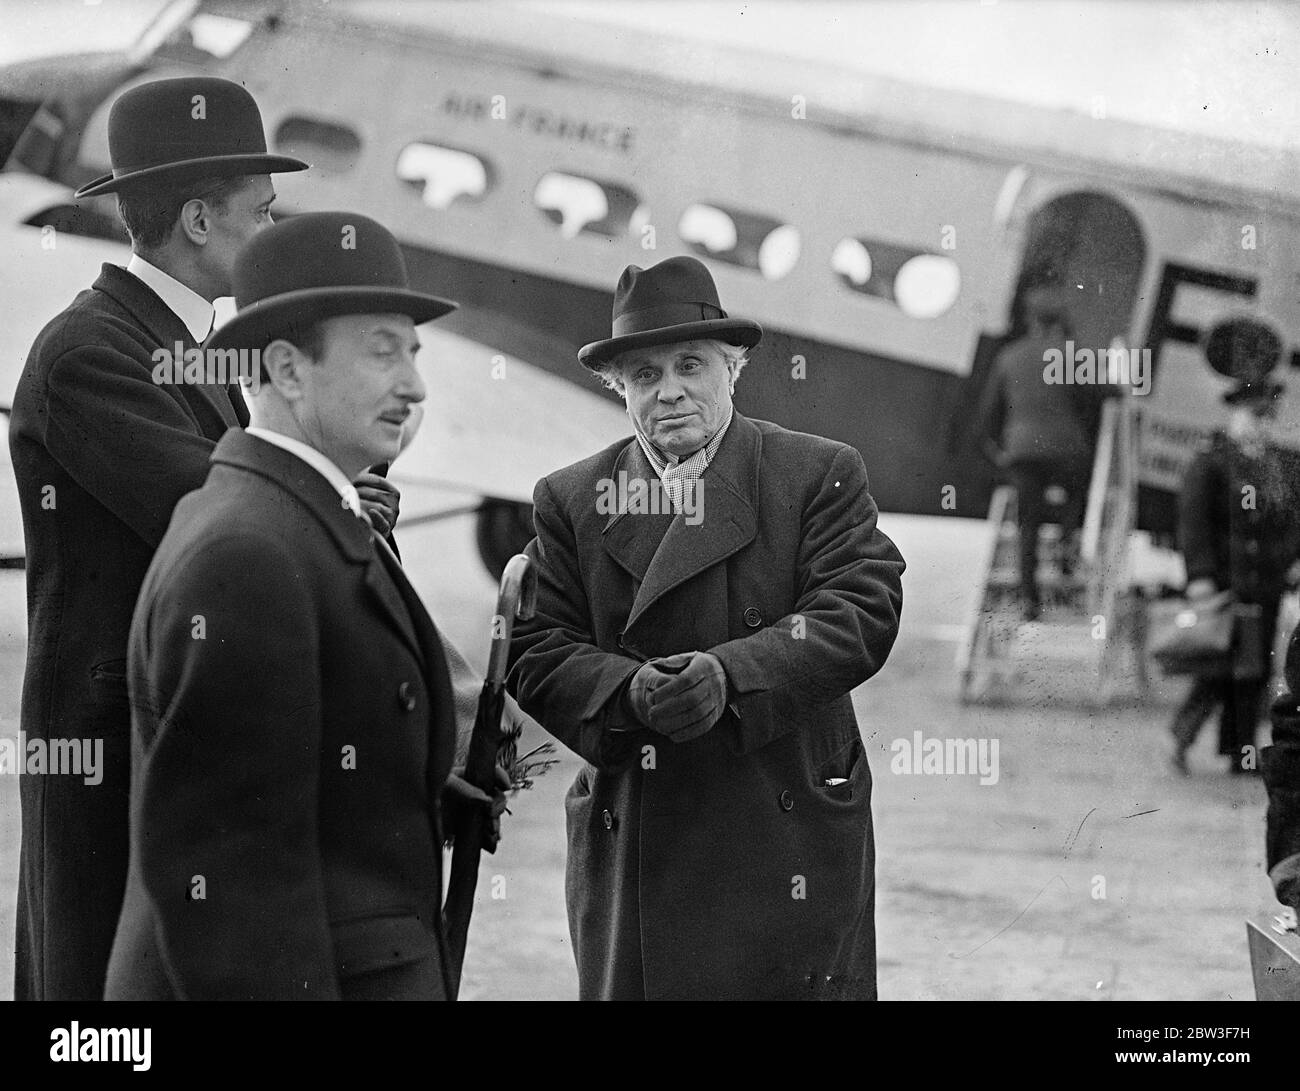 M Paul Boncour arrives at Croydon by air for League Council meeting . M Paul Boncour , French Minister of State , arrived at Croydon by air to attend the meeting of the League Council in St James in St James ' s Palace tomorrow ( Saturday ) when the Rhineland situation will be discussed . Photo shows , M Paul Boncour leaving the plane on arrival at Croydon . 13 March 1936 Stock Photo